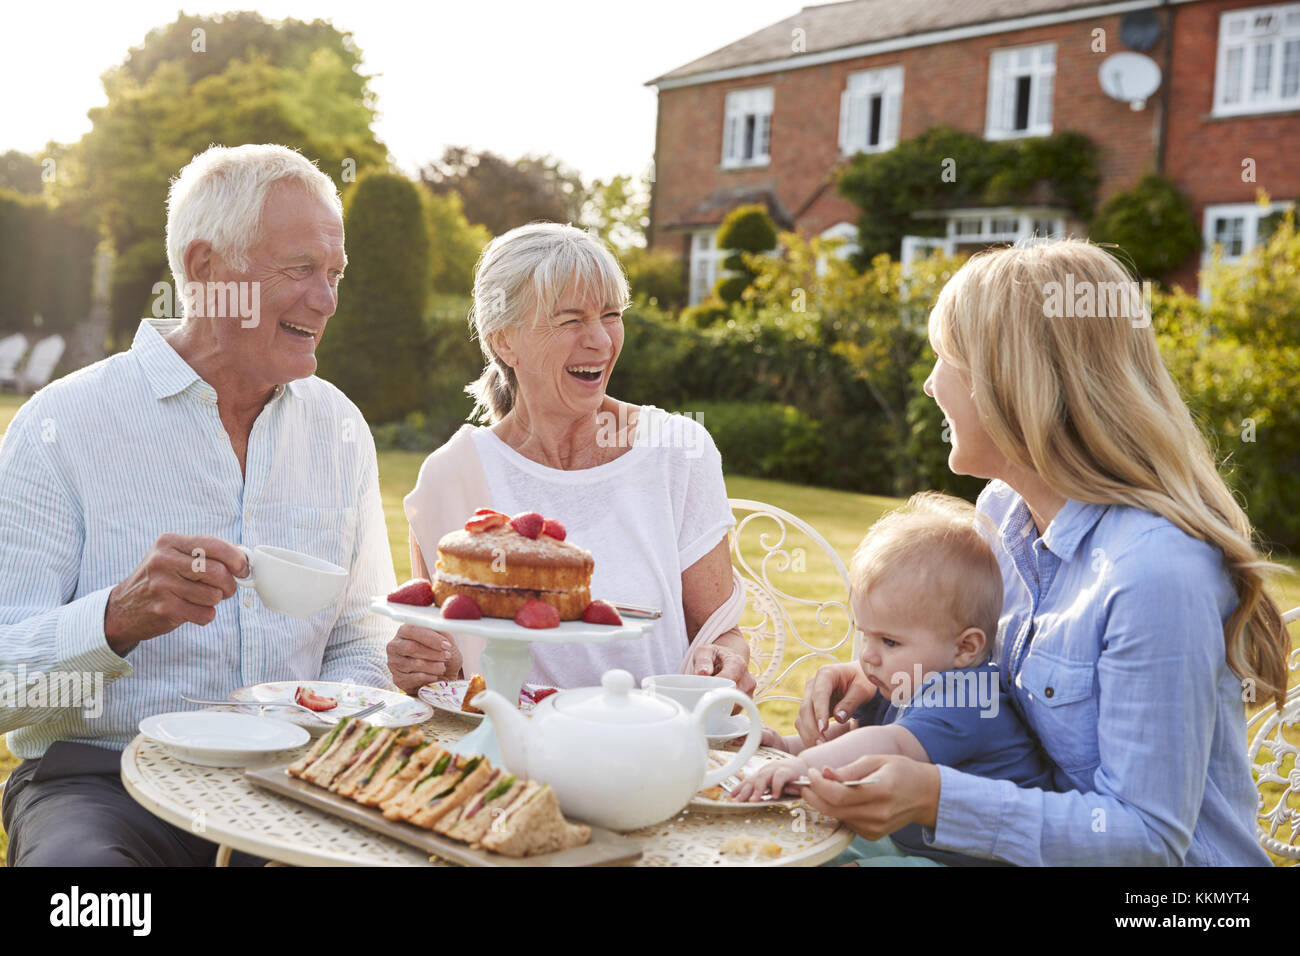 Grandparents Have Afternoon Tea With Grandson And Adult Daughter Stock Photo